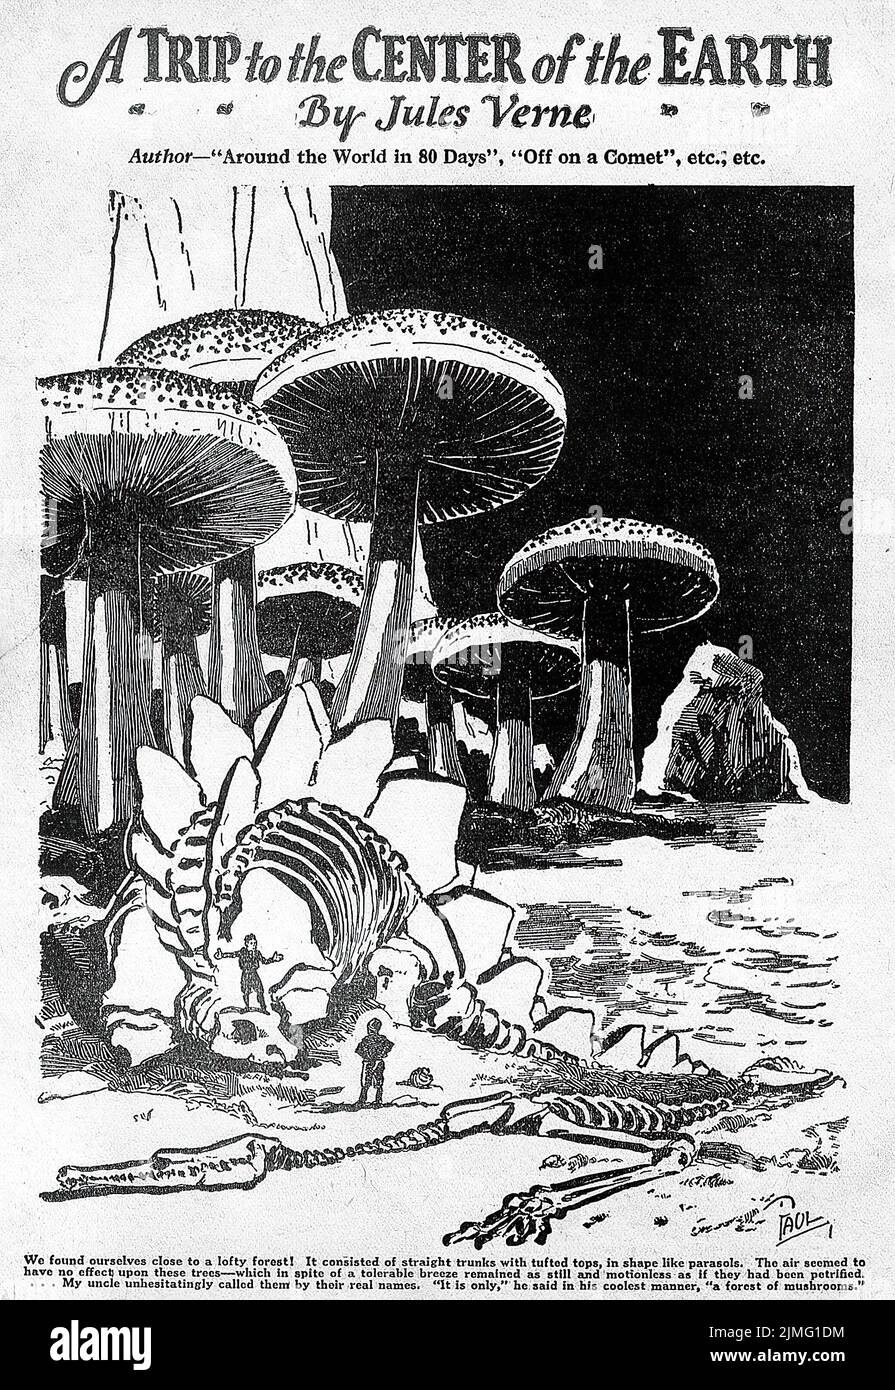 A Trip to the Center of the Earth (Journey to the Center of the Earth) (1864) by Jules Verne. Illustration by Frank R. Paul from Amazing Stories, June 1926. Stock Photo